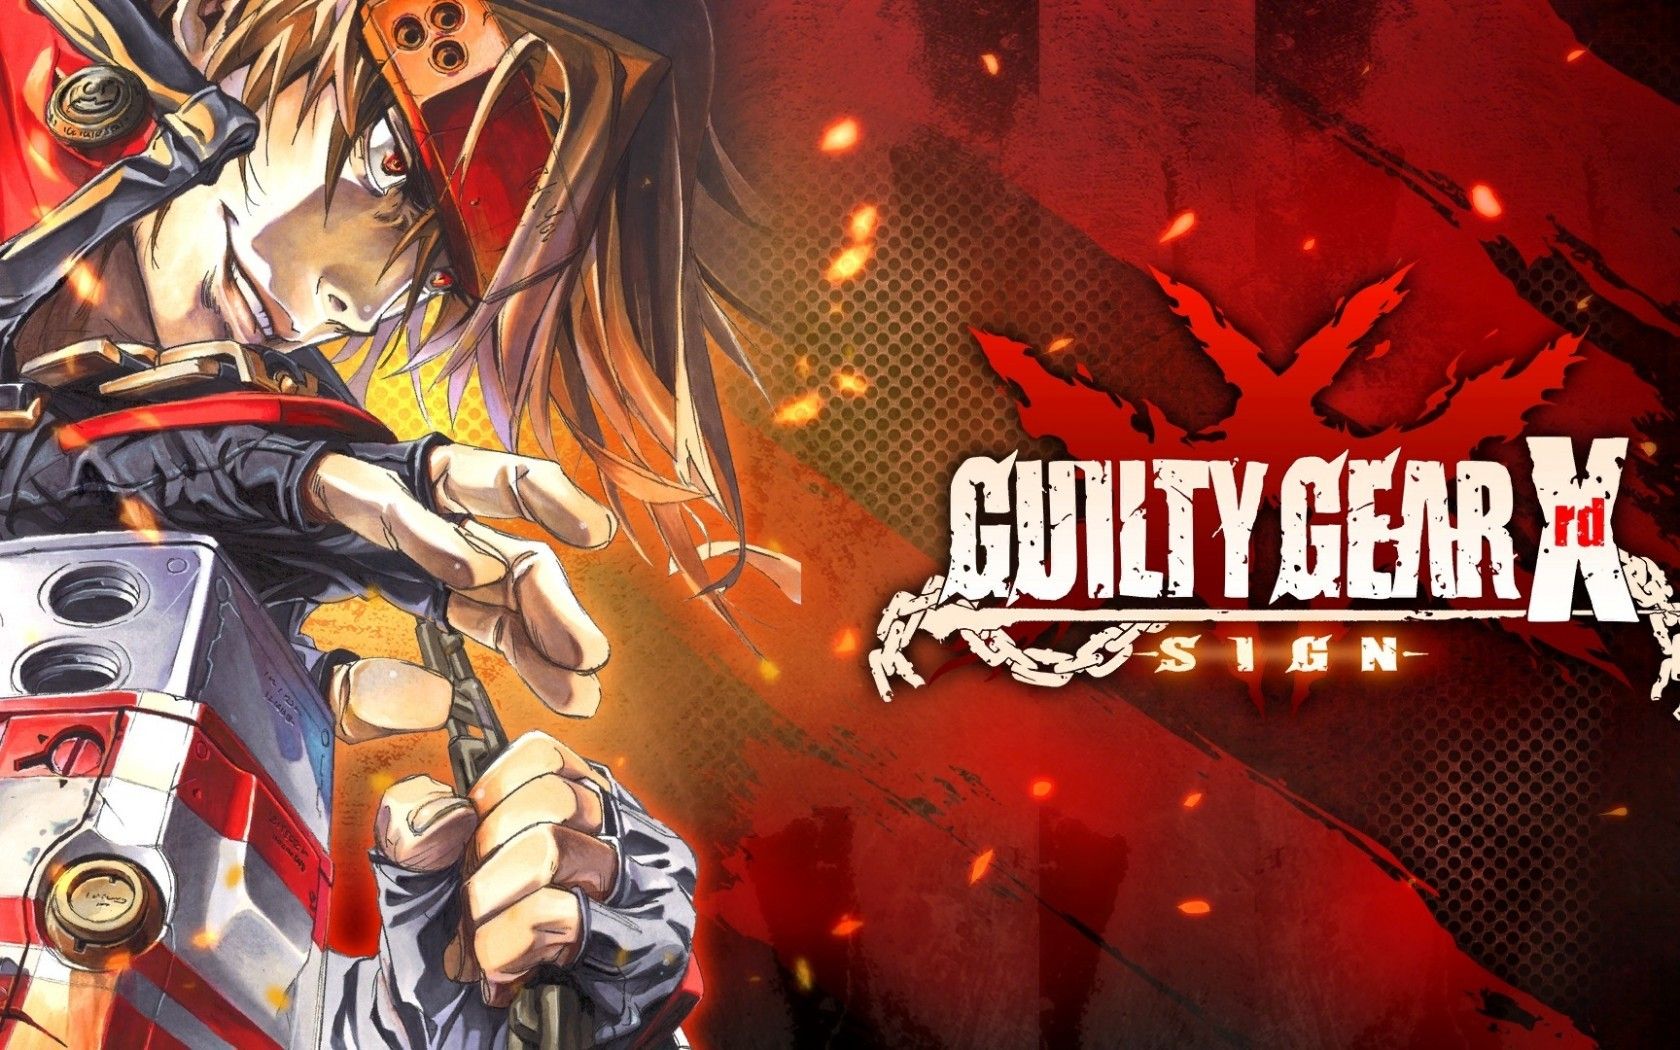 Guilty Gear Xrd Sign, Sol Badguy, Sword, Anime Style